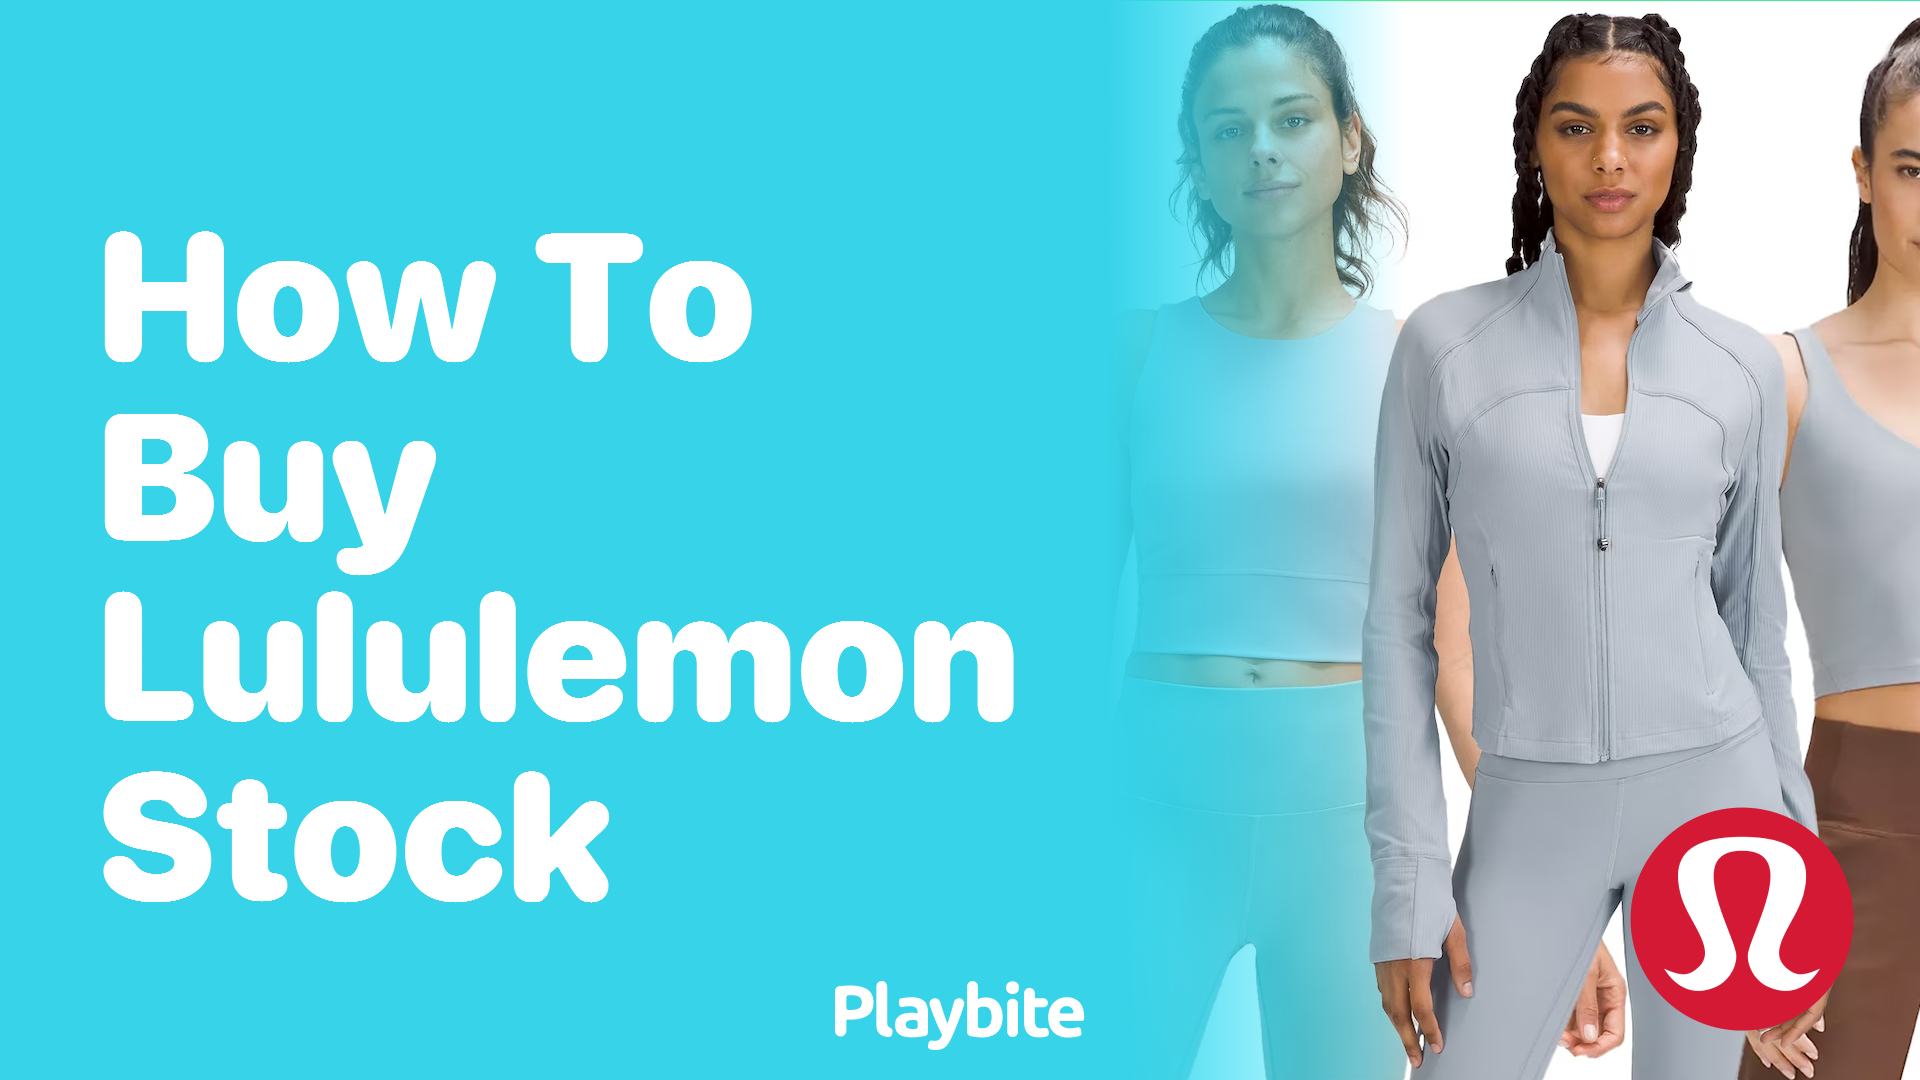 4 Reasons To Buy Lululemon Stock After Surprise Online Sale